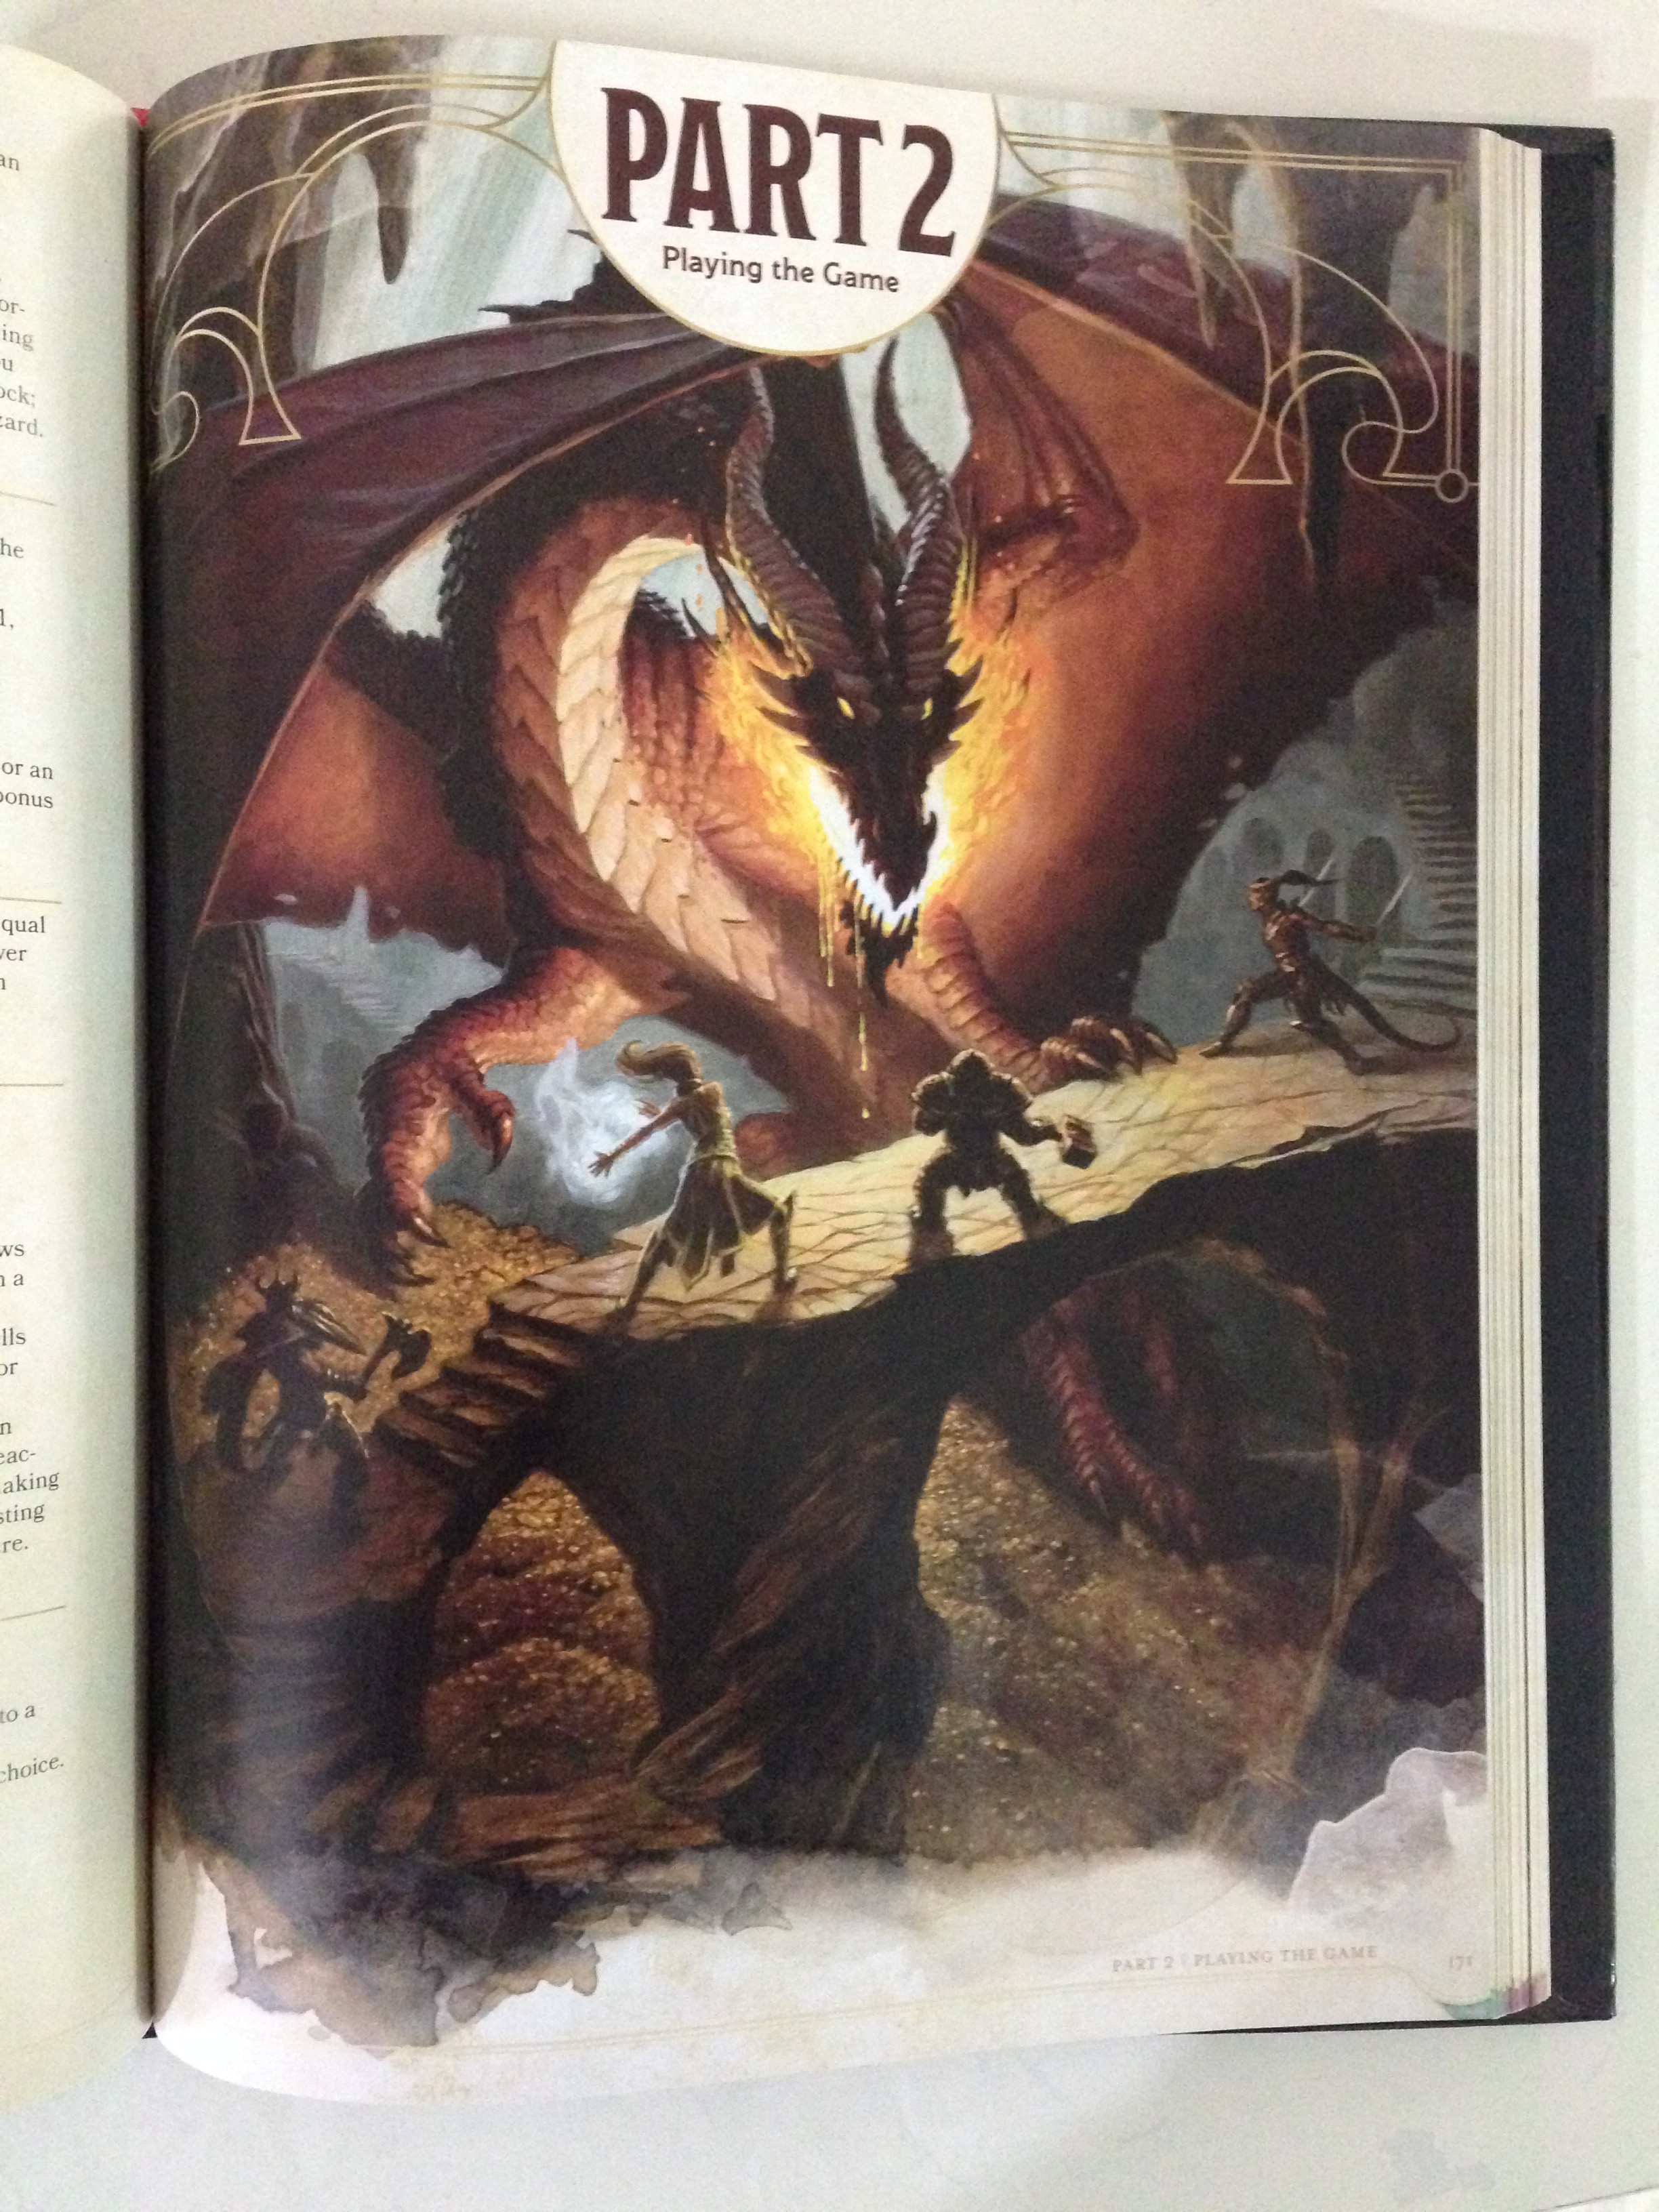 More splash page art of Player's Handbook, A Core Rulebook for Dungeons & Dragons 5th Edition